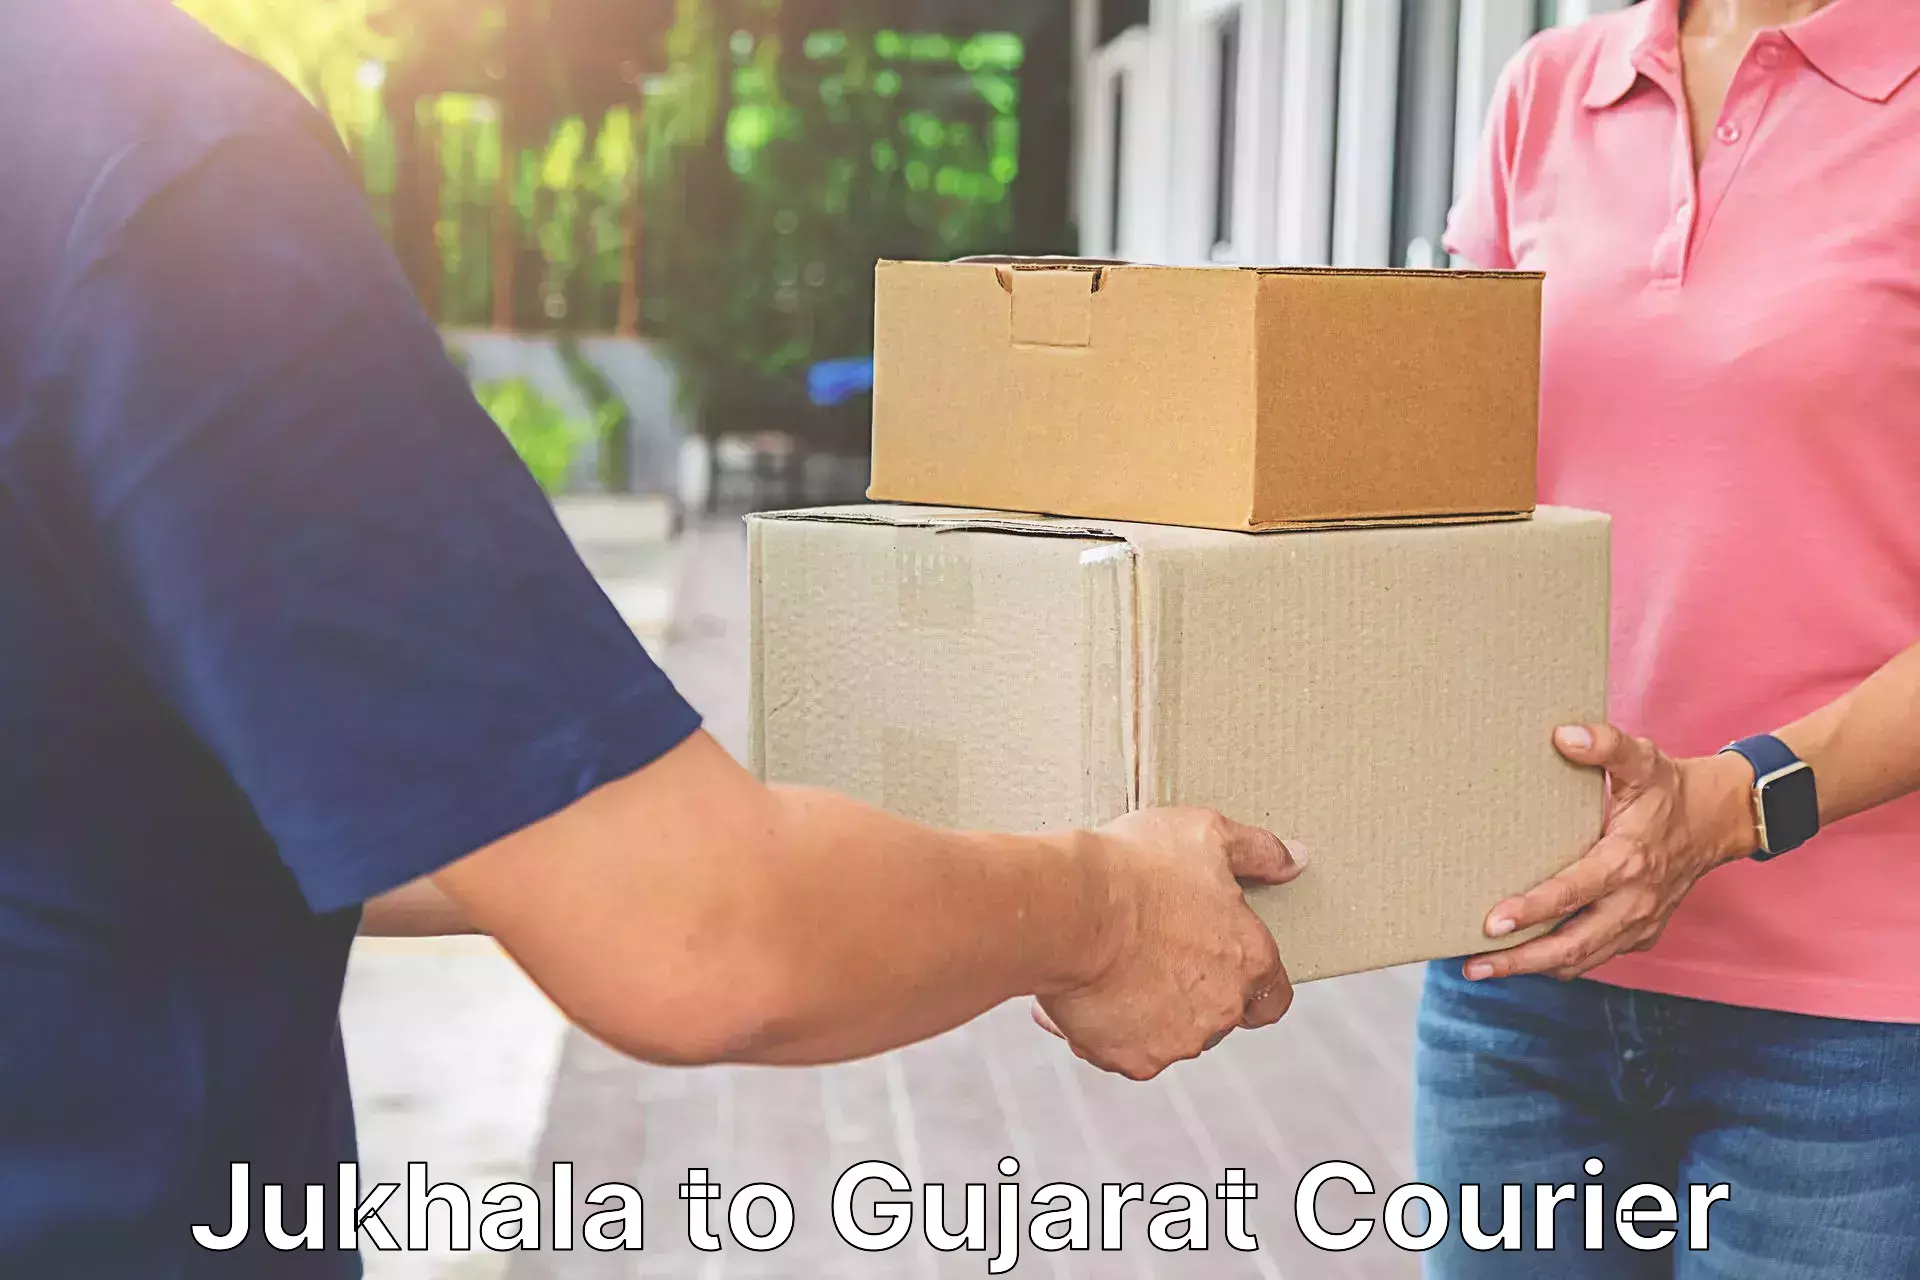 Secure package delivery Jukhala to Ahmedabad